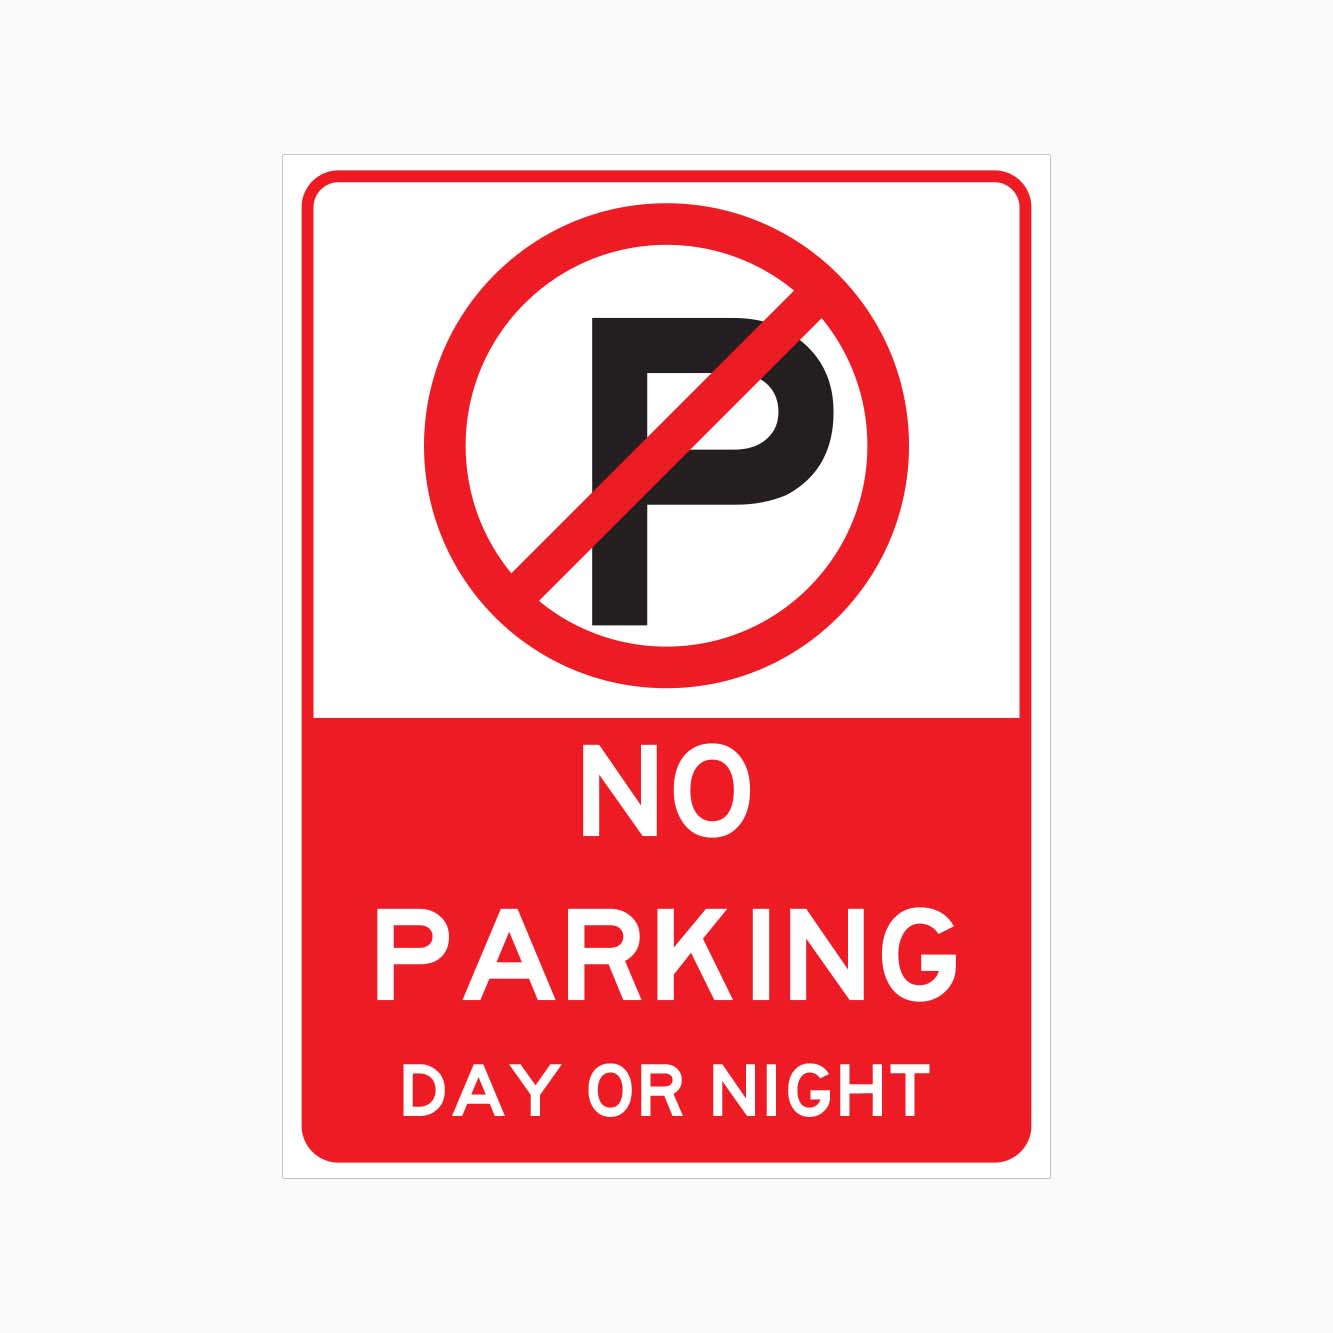 NO PARKING DAY OR NIGHT SIGN - GET SIGNS